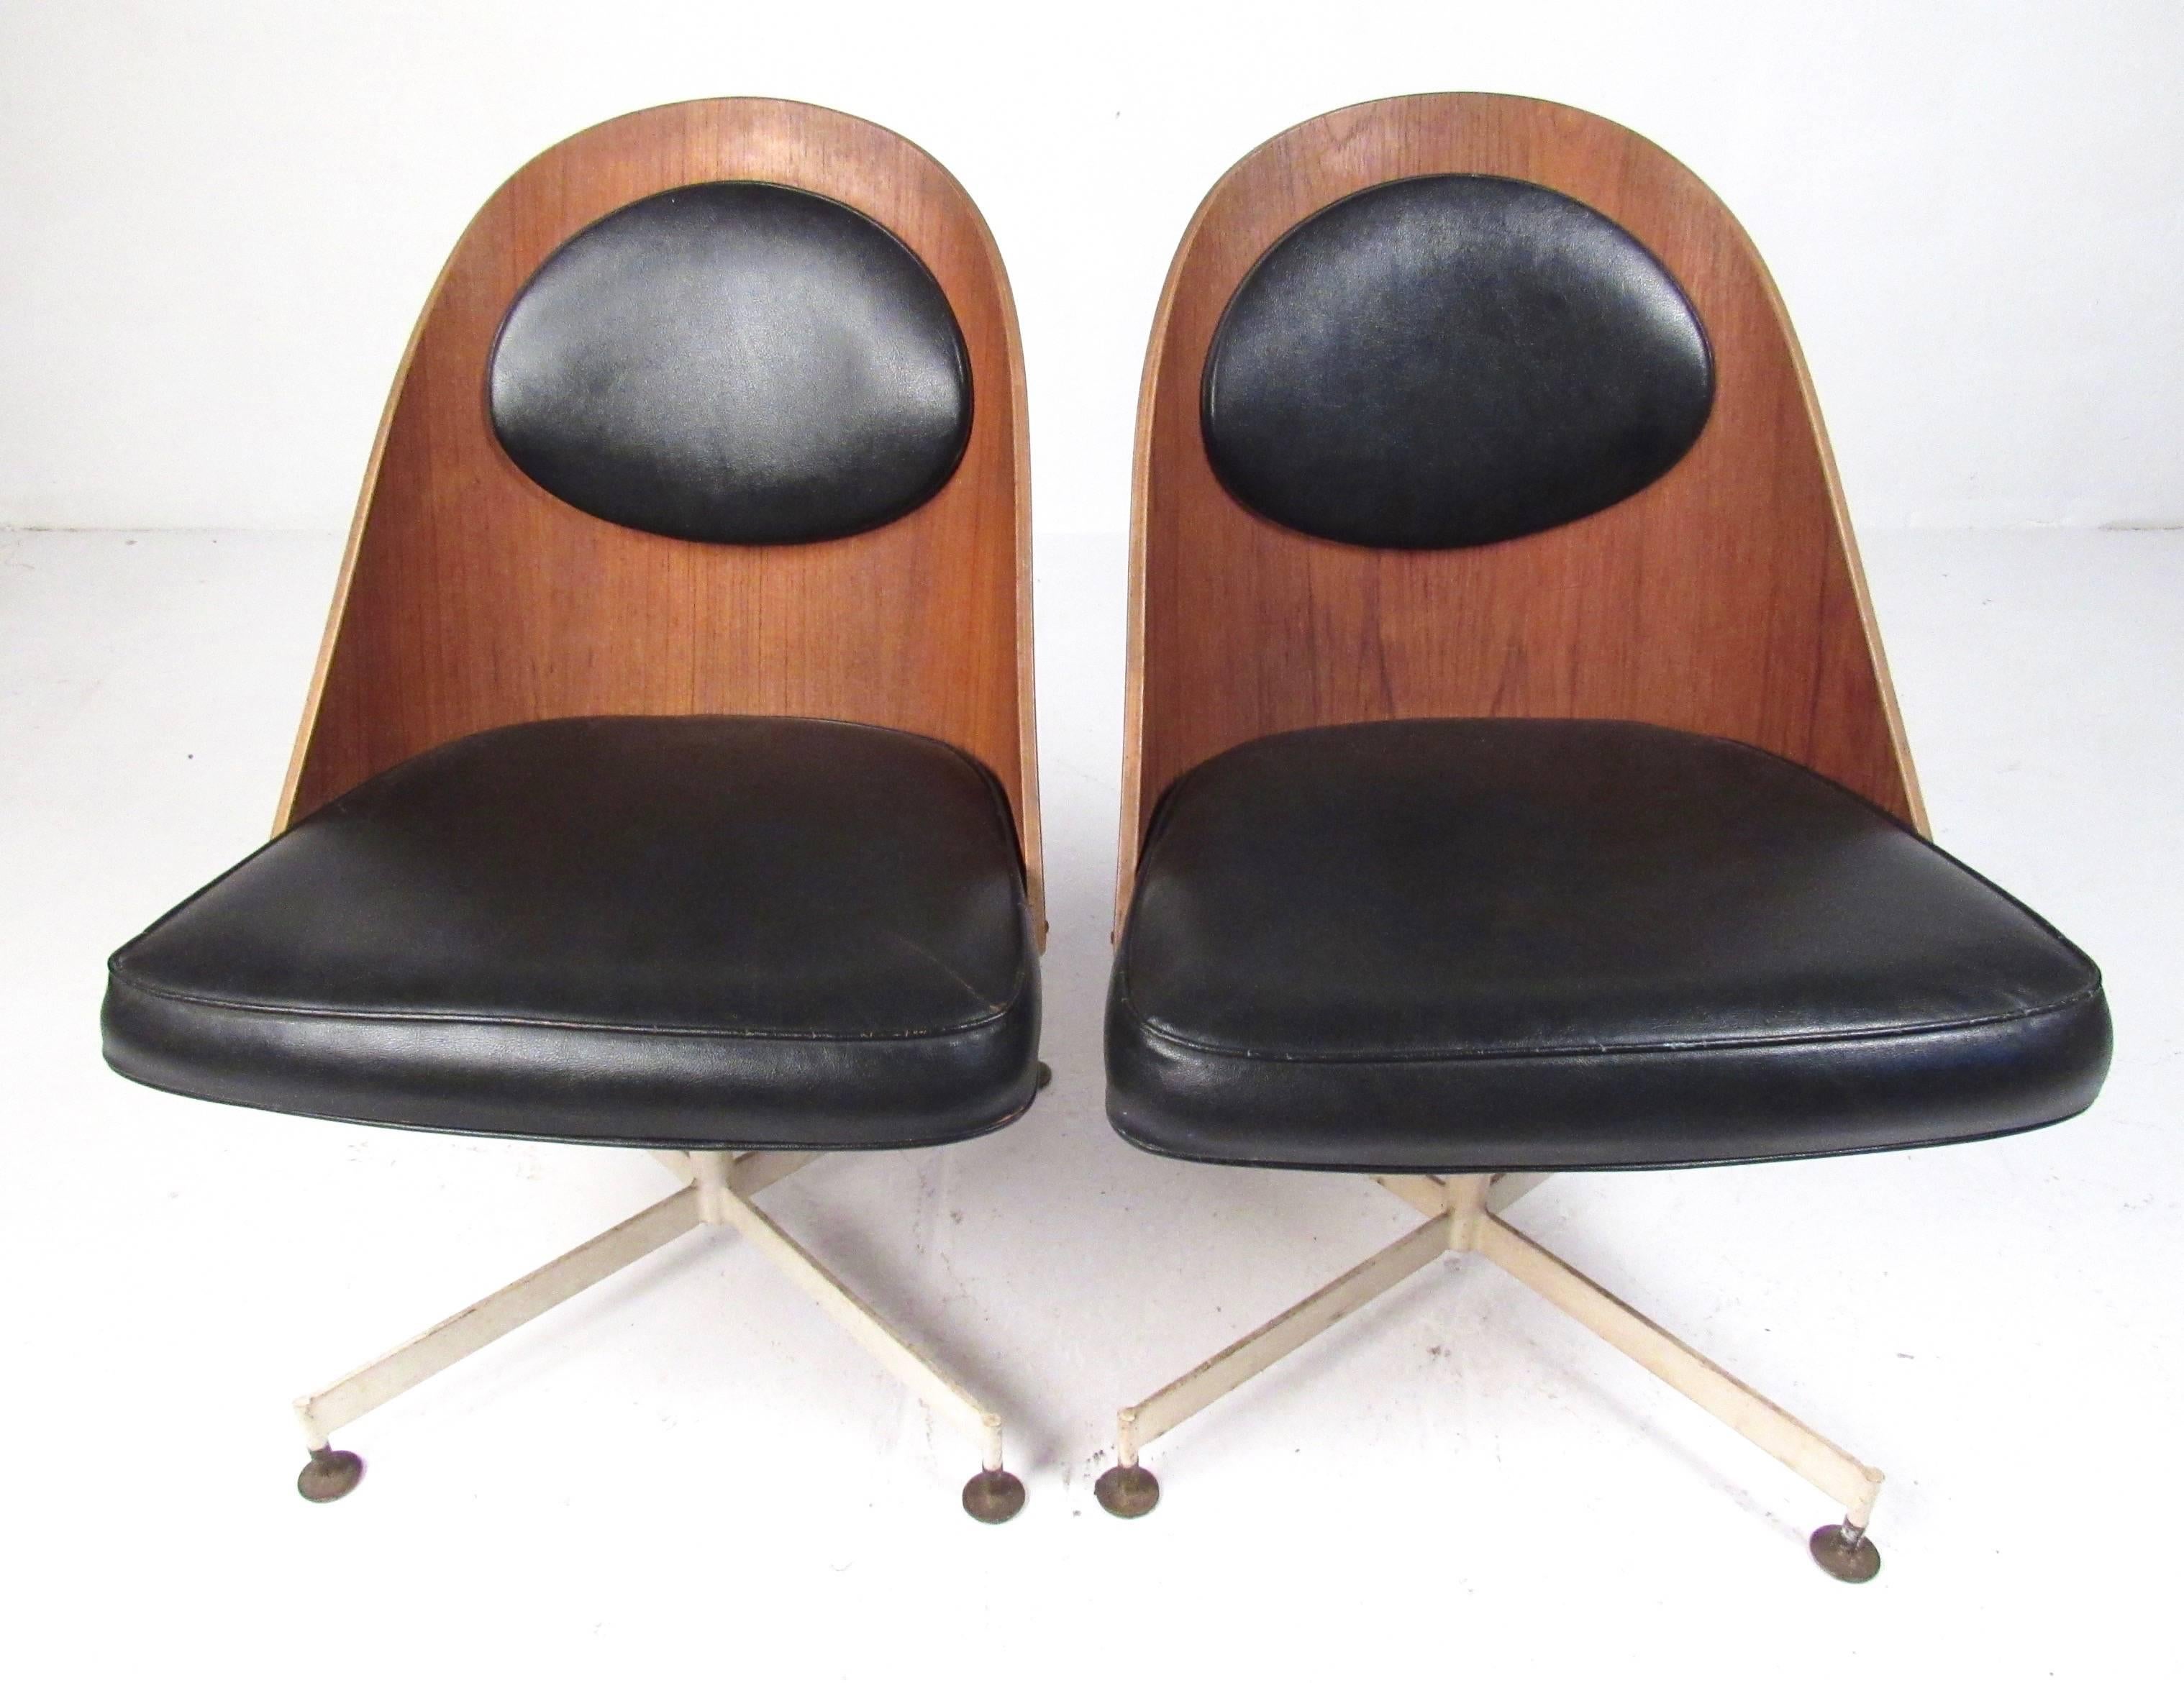 This vintage modern desk chair features swivel metal base and shapely bentwood seat back. Unique mid-century modern style makes this a stylish addition to any home or office as a desk or side chair. Note: Price is for one chair, two available.